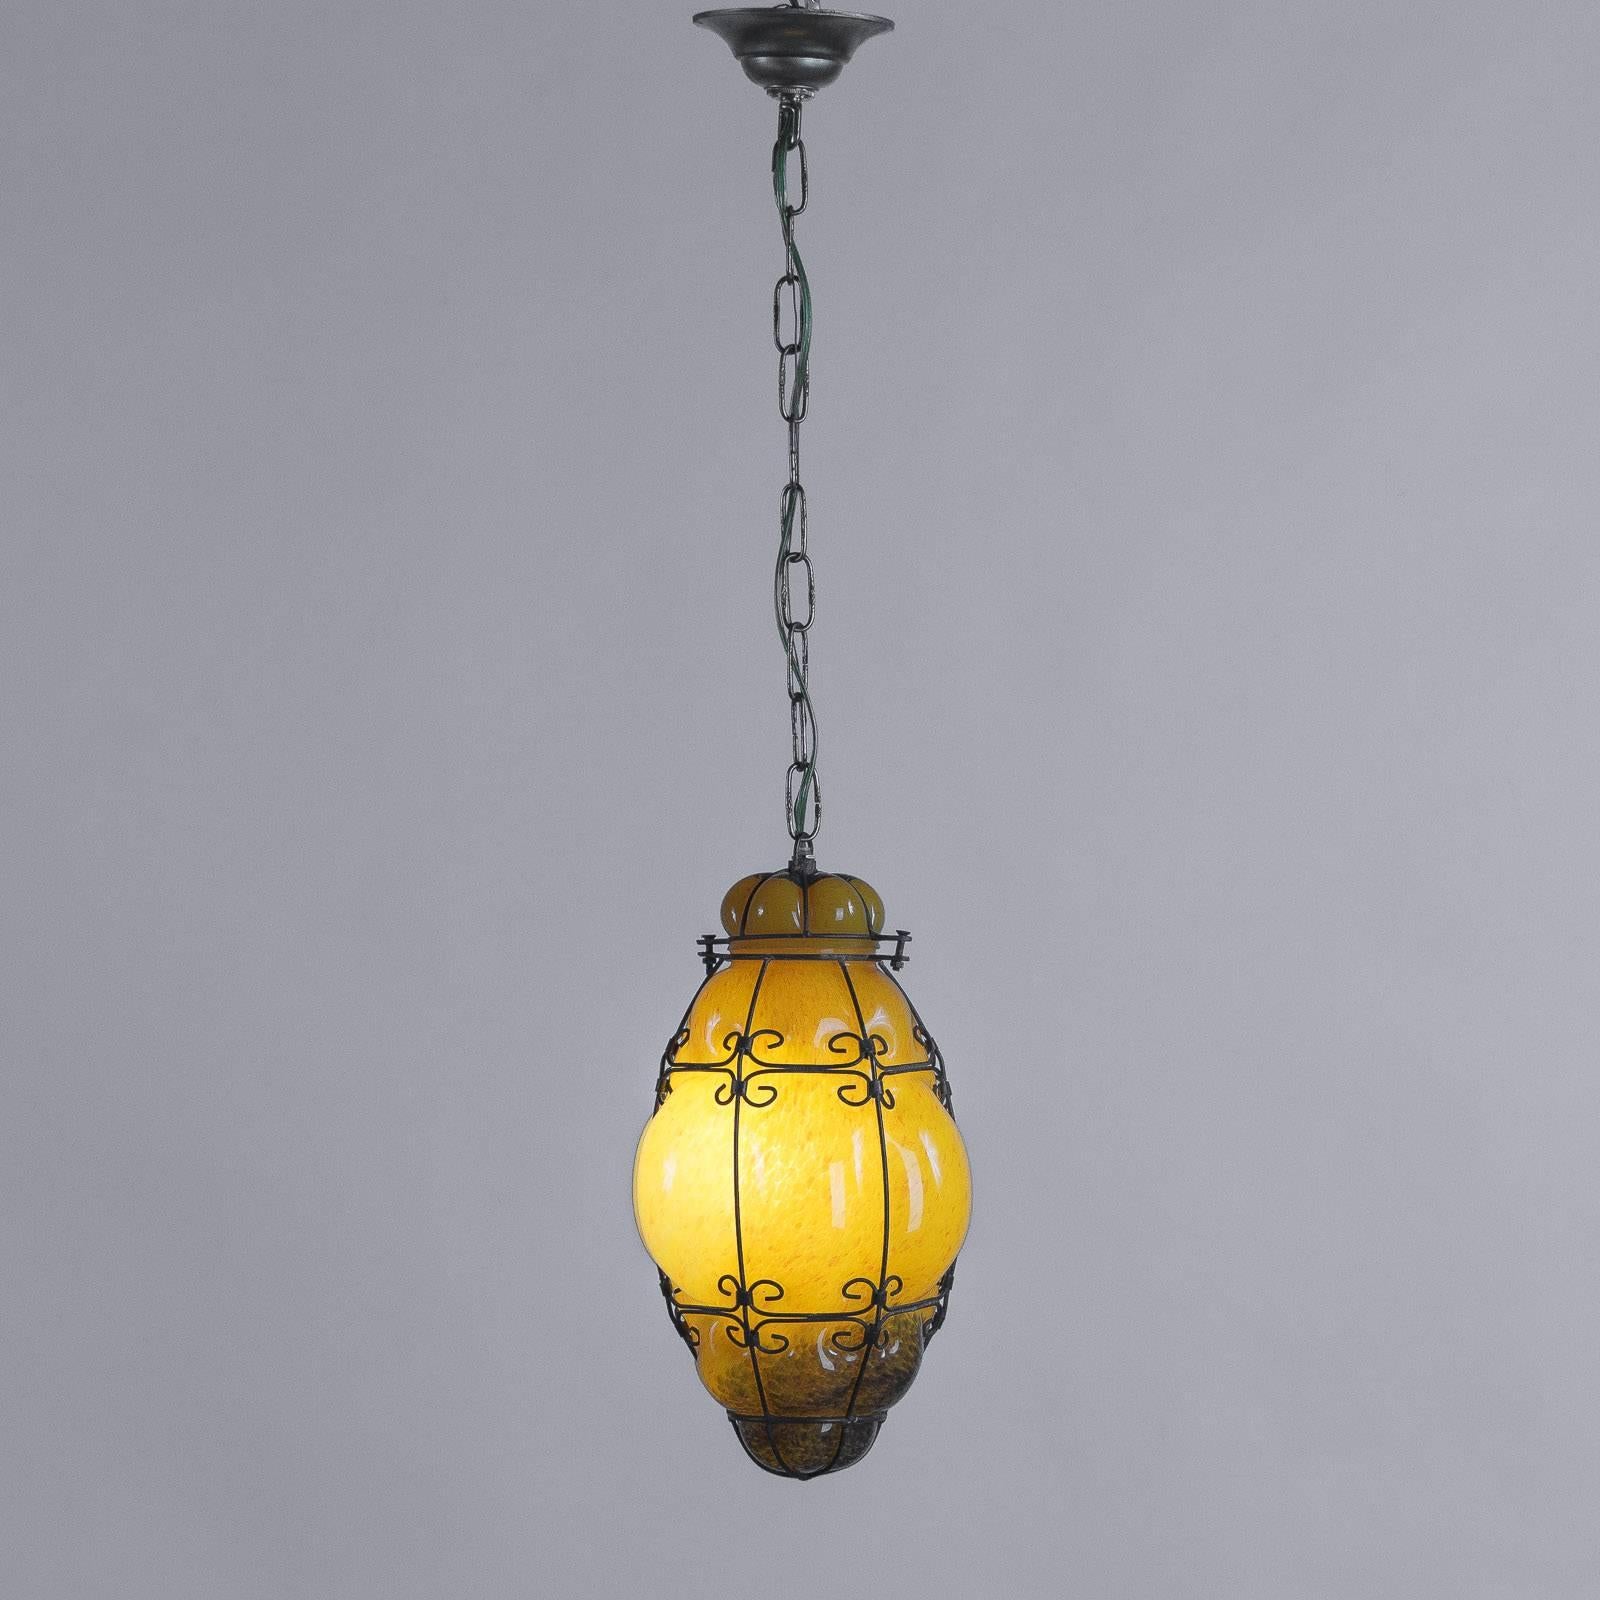 Midcentury Caged Murano Glass Pendant Lantern, Italy, 1950s For Sale 3